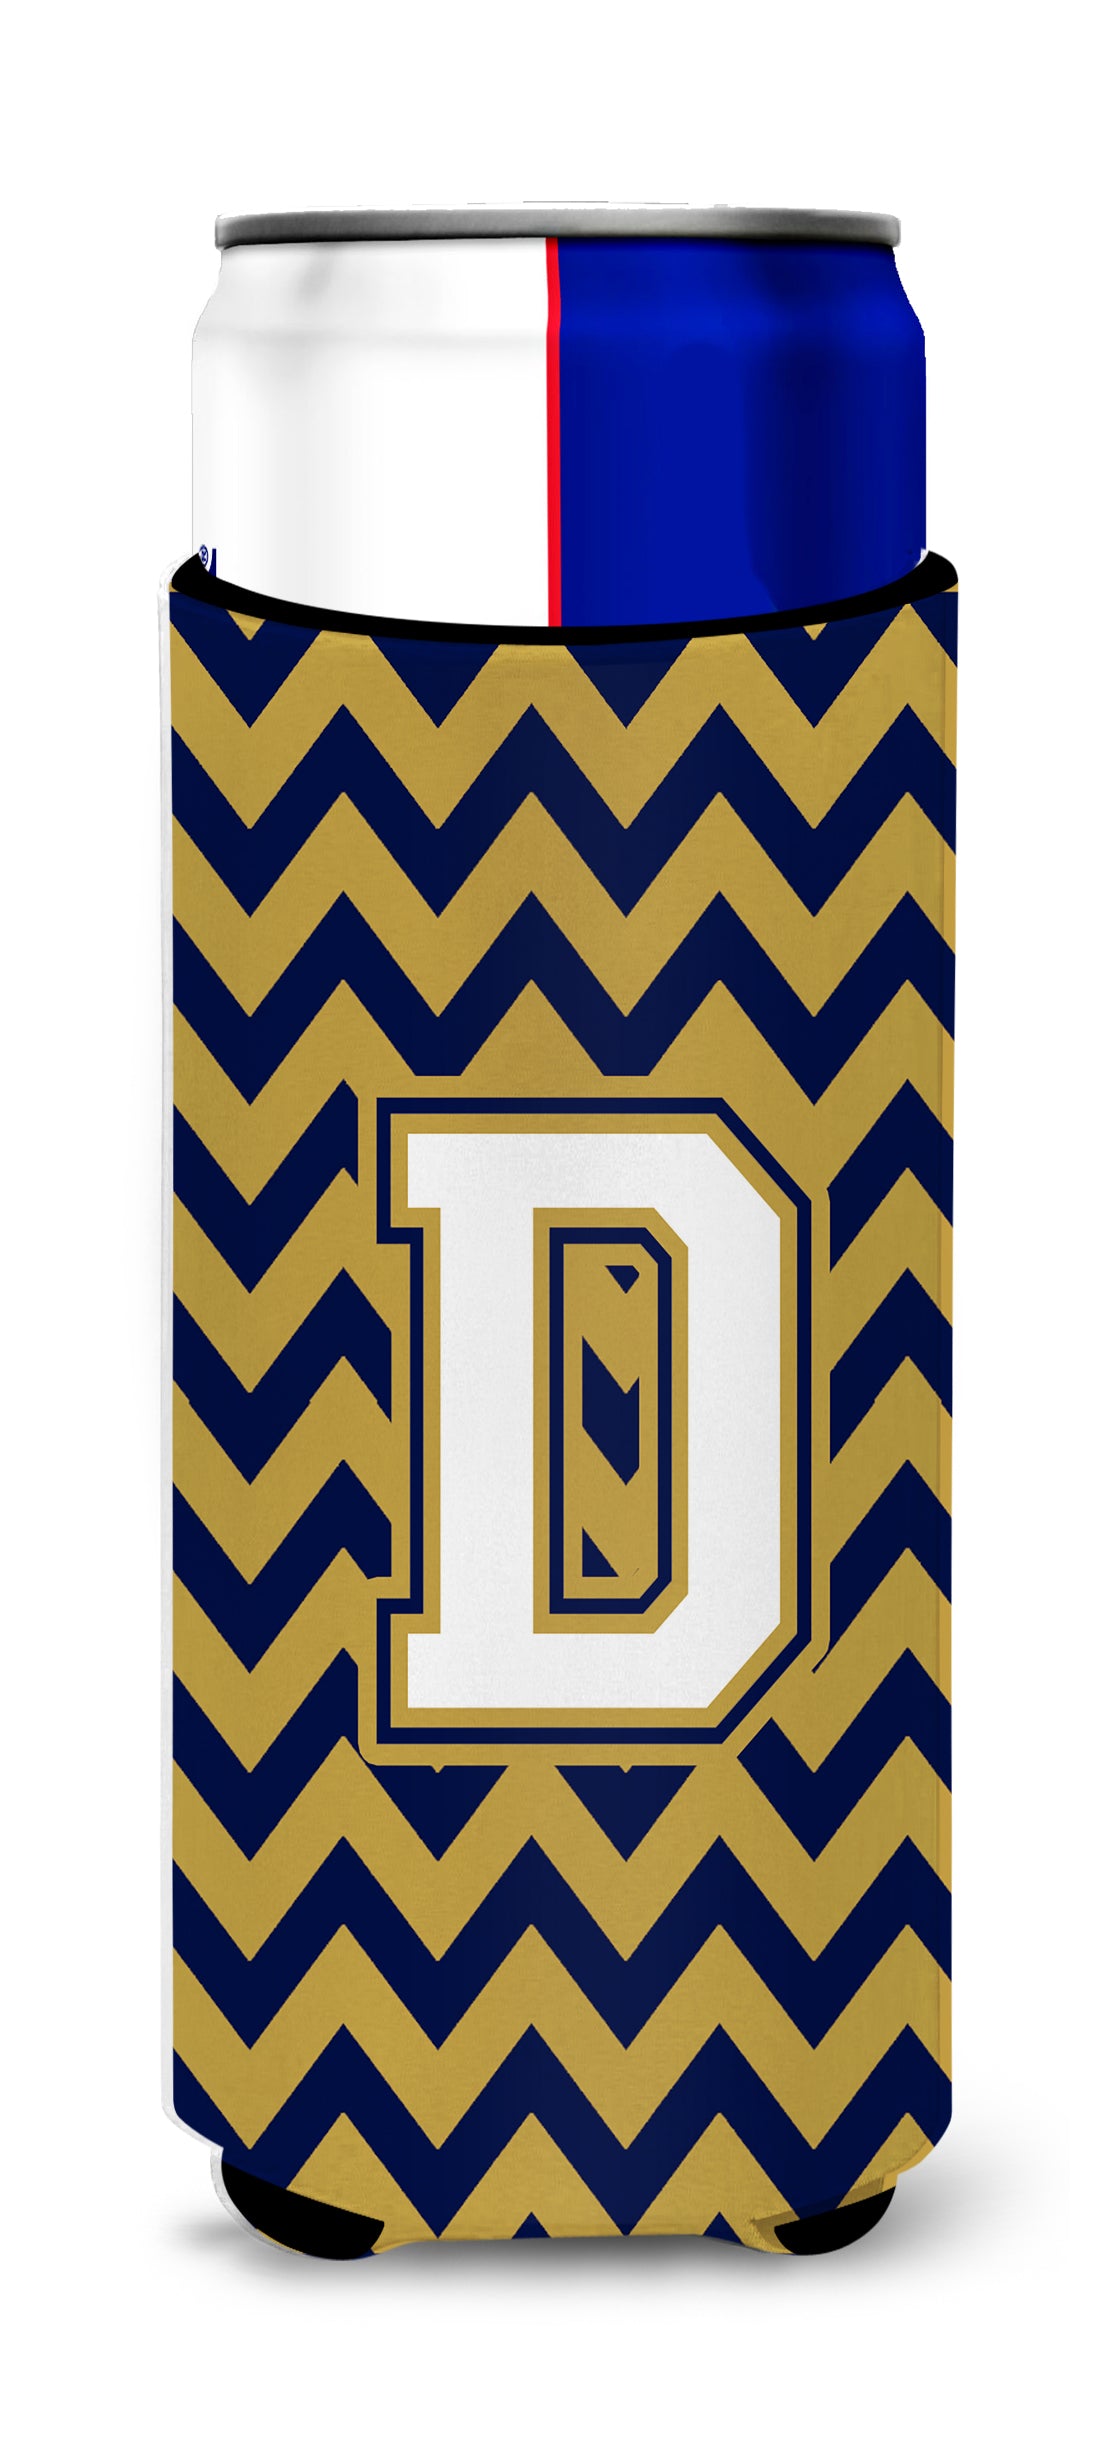 Letter D Chevron Navy Blue and Gold Ultra Beverage Insulators for slim cans CJ1057-DMUK.